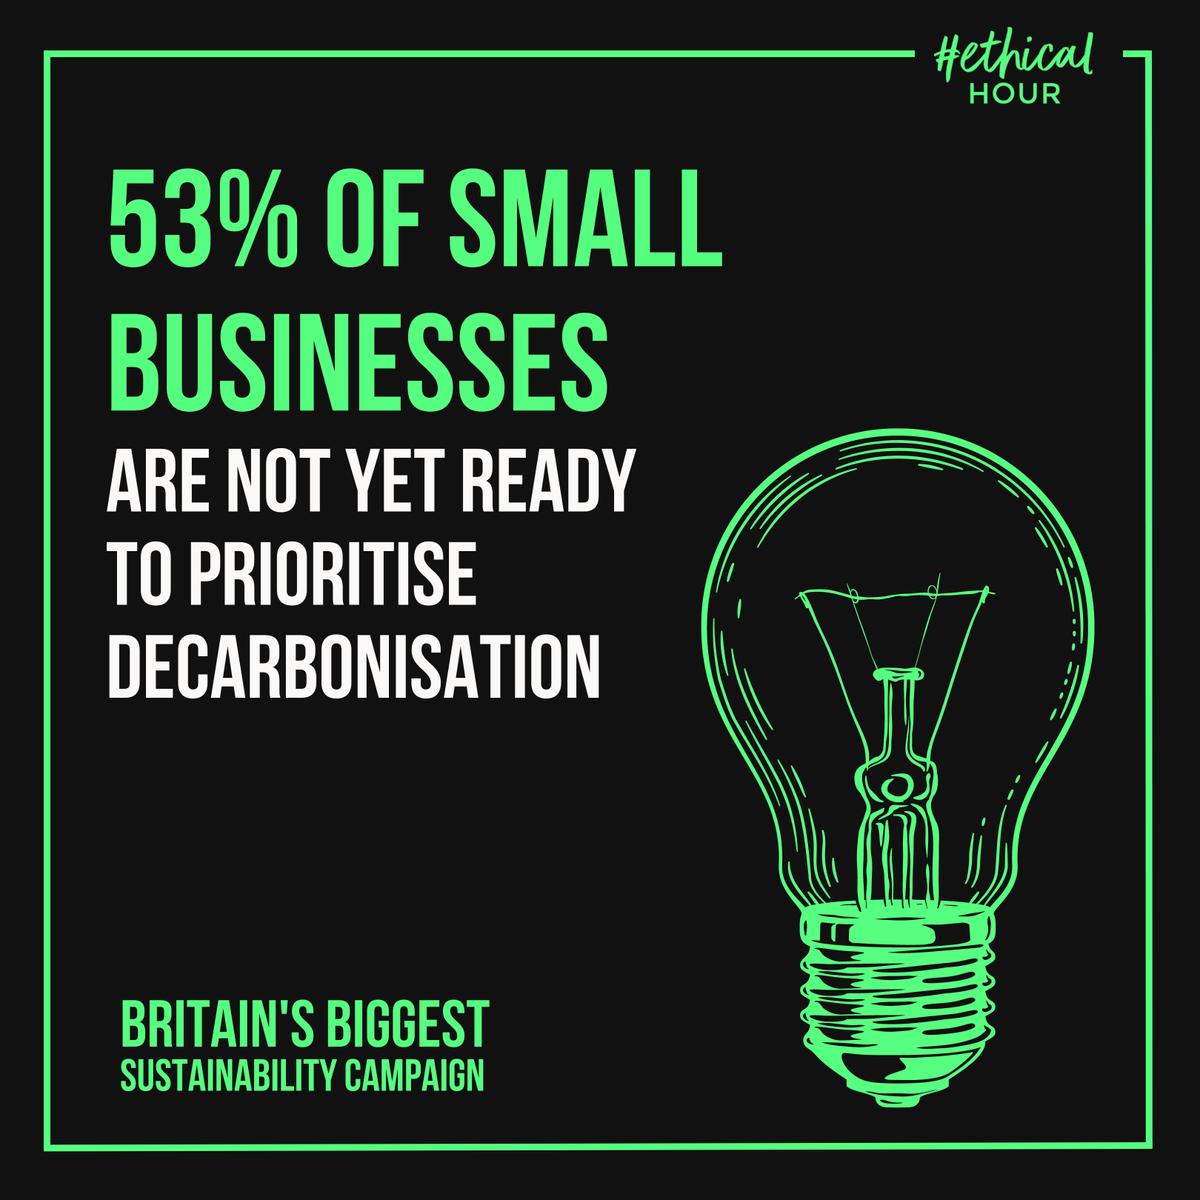 53% of small businesses say they are not yet ready to prioritise decarbonisation

Is your #SmallBusiness on its #NetZero journey?

#EthicalHour #SmallBiz #UKSmallBiz #SME #SMEUK #EthicalBusiness #SustainableBusiness #BusinessNetZero